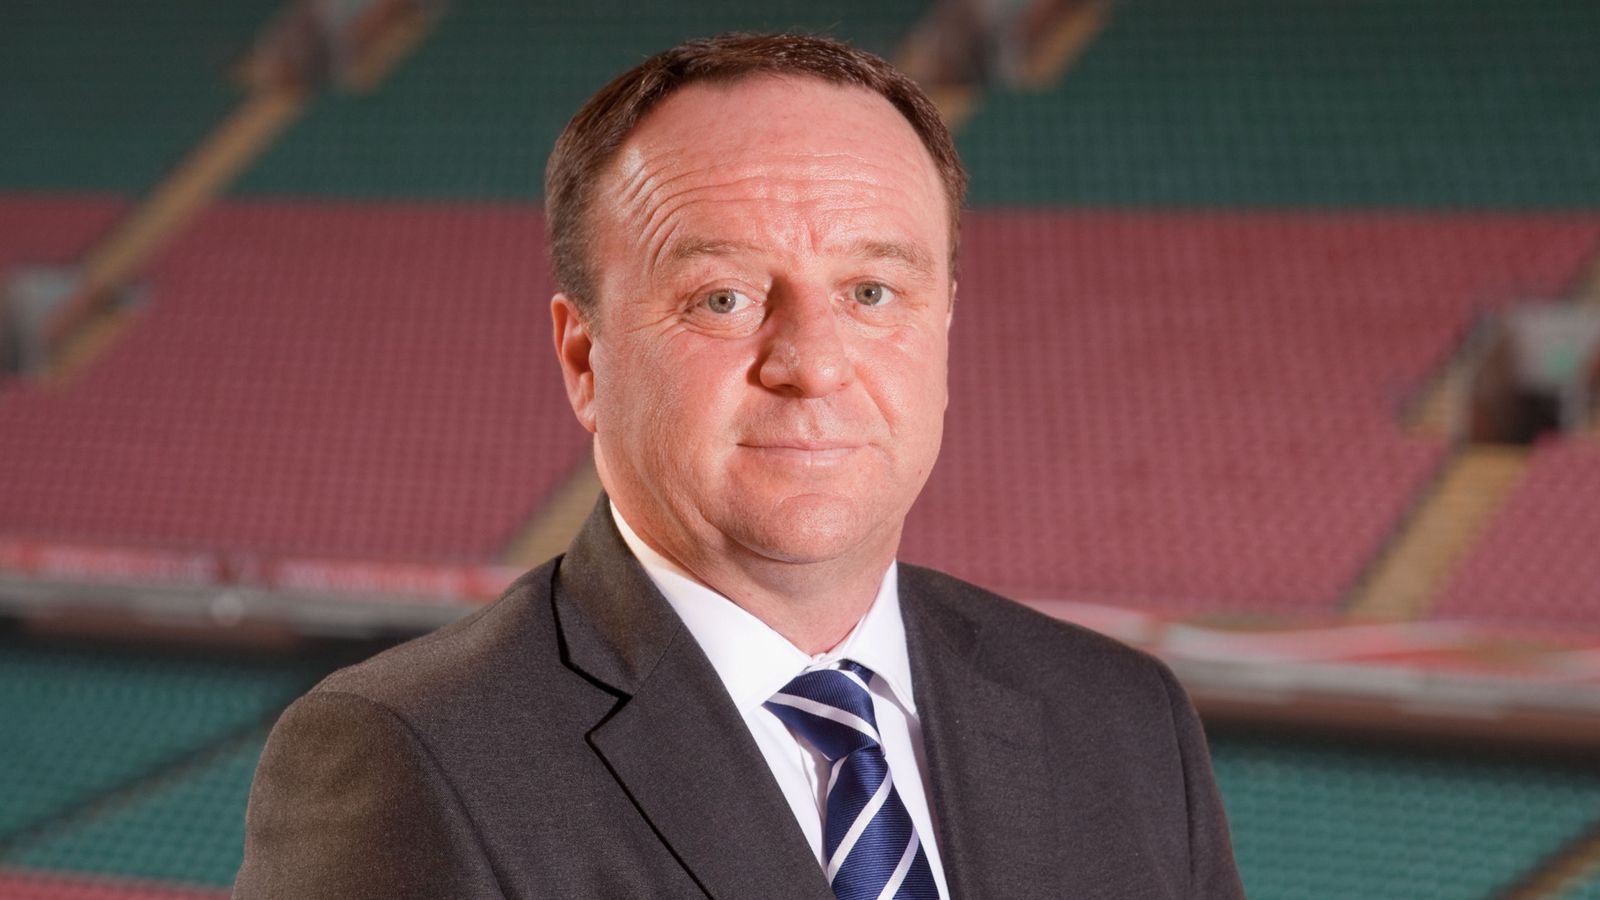 Welsh Rugby Union chief executive Steve Phillips resigns after claims of racism, sexism and homophobia in organisation